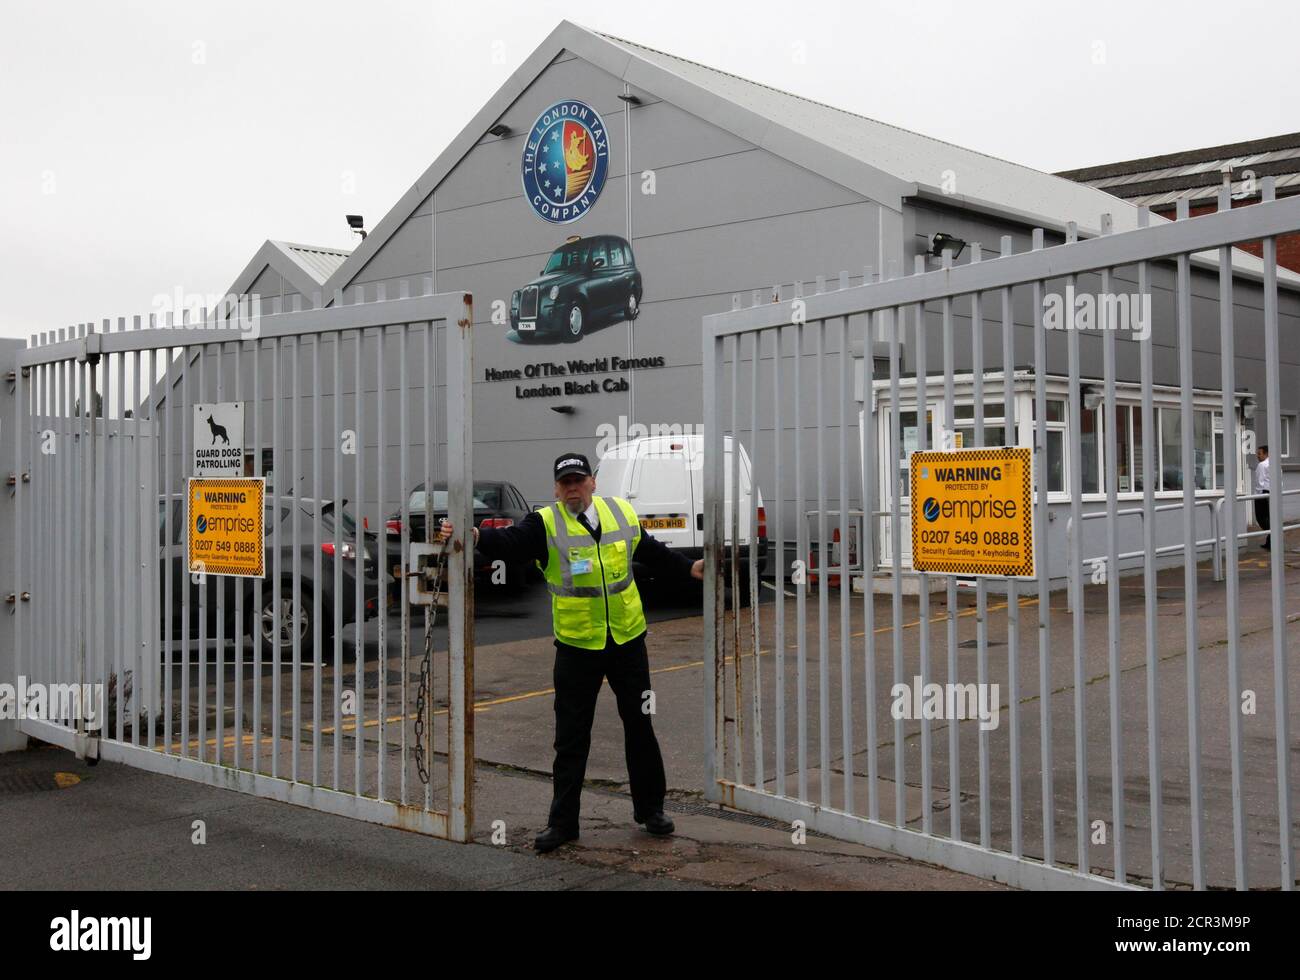 A security guard closes the main gate of the London Taxi Company in  Coventry, central England October 22, 2012. Manganese Bronze Holdings Plc,  the maker of London's iconic black cabs, said it